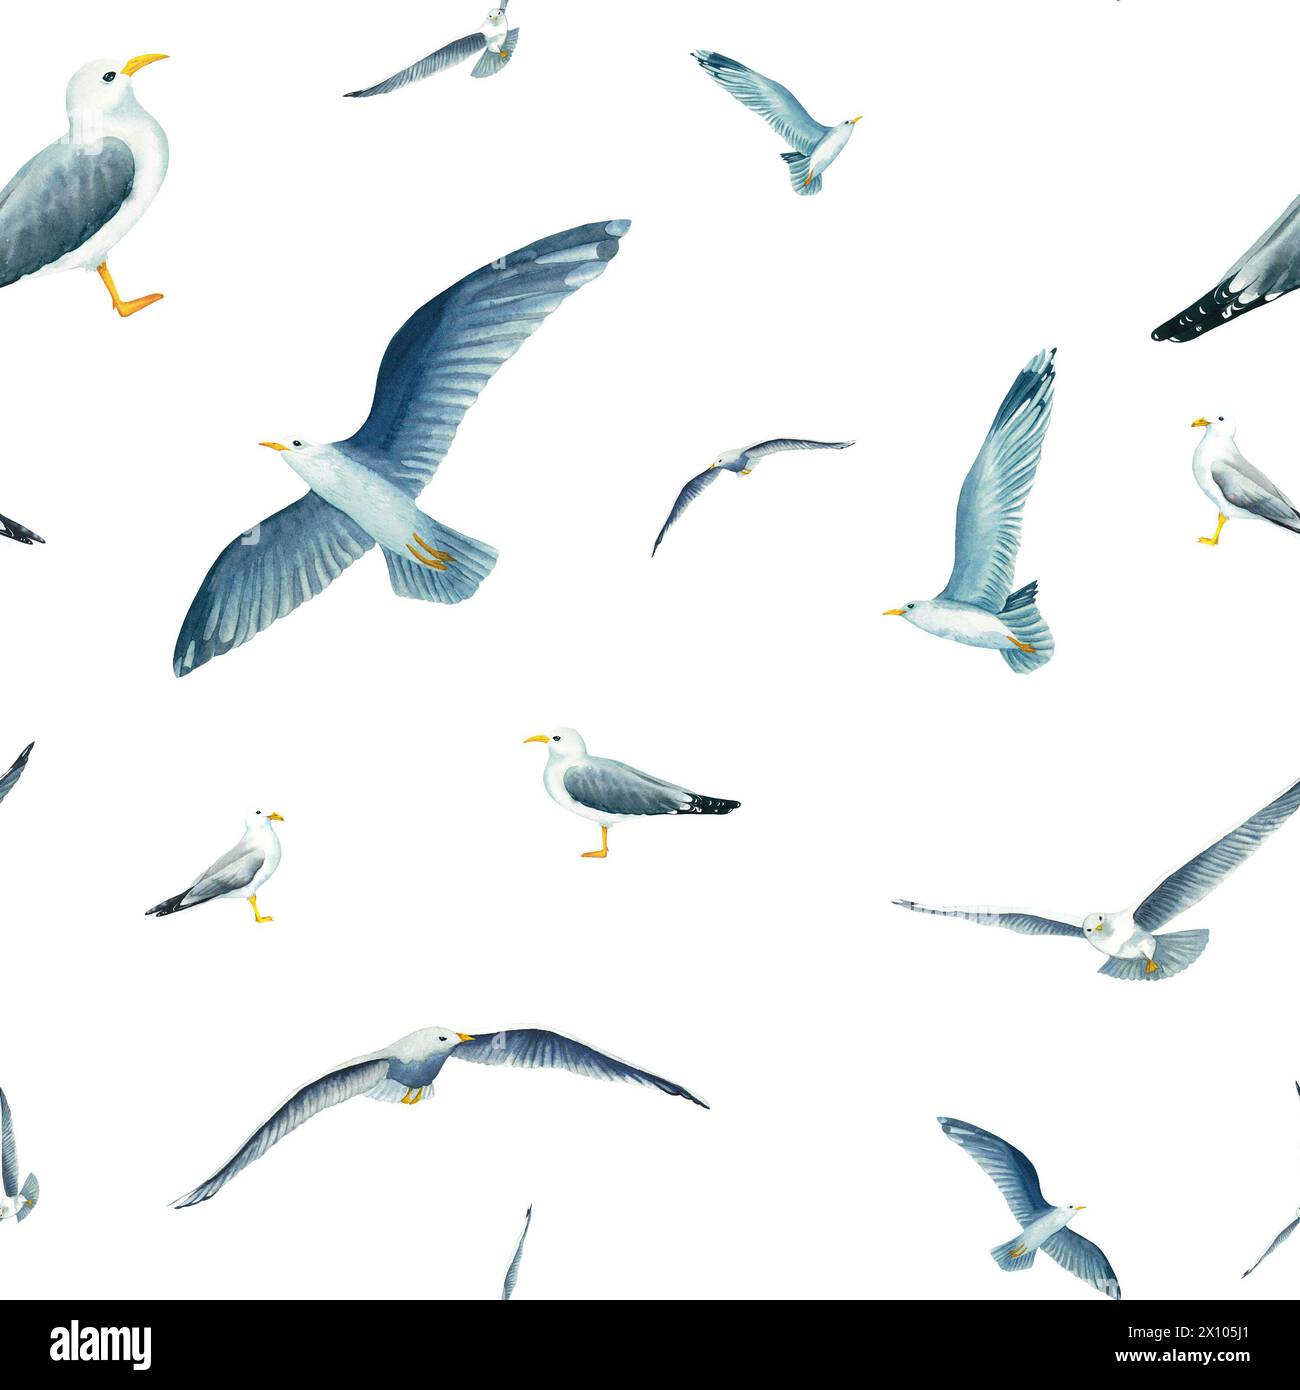 Seamless pattern with flying in the sky seagulls in watercolor isolated on white background. Hand drawn illustration on the theme of sea fishing. Chil Stock Photo